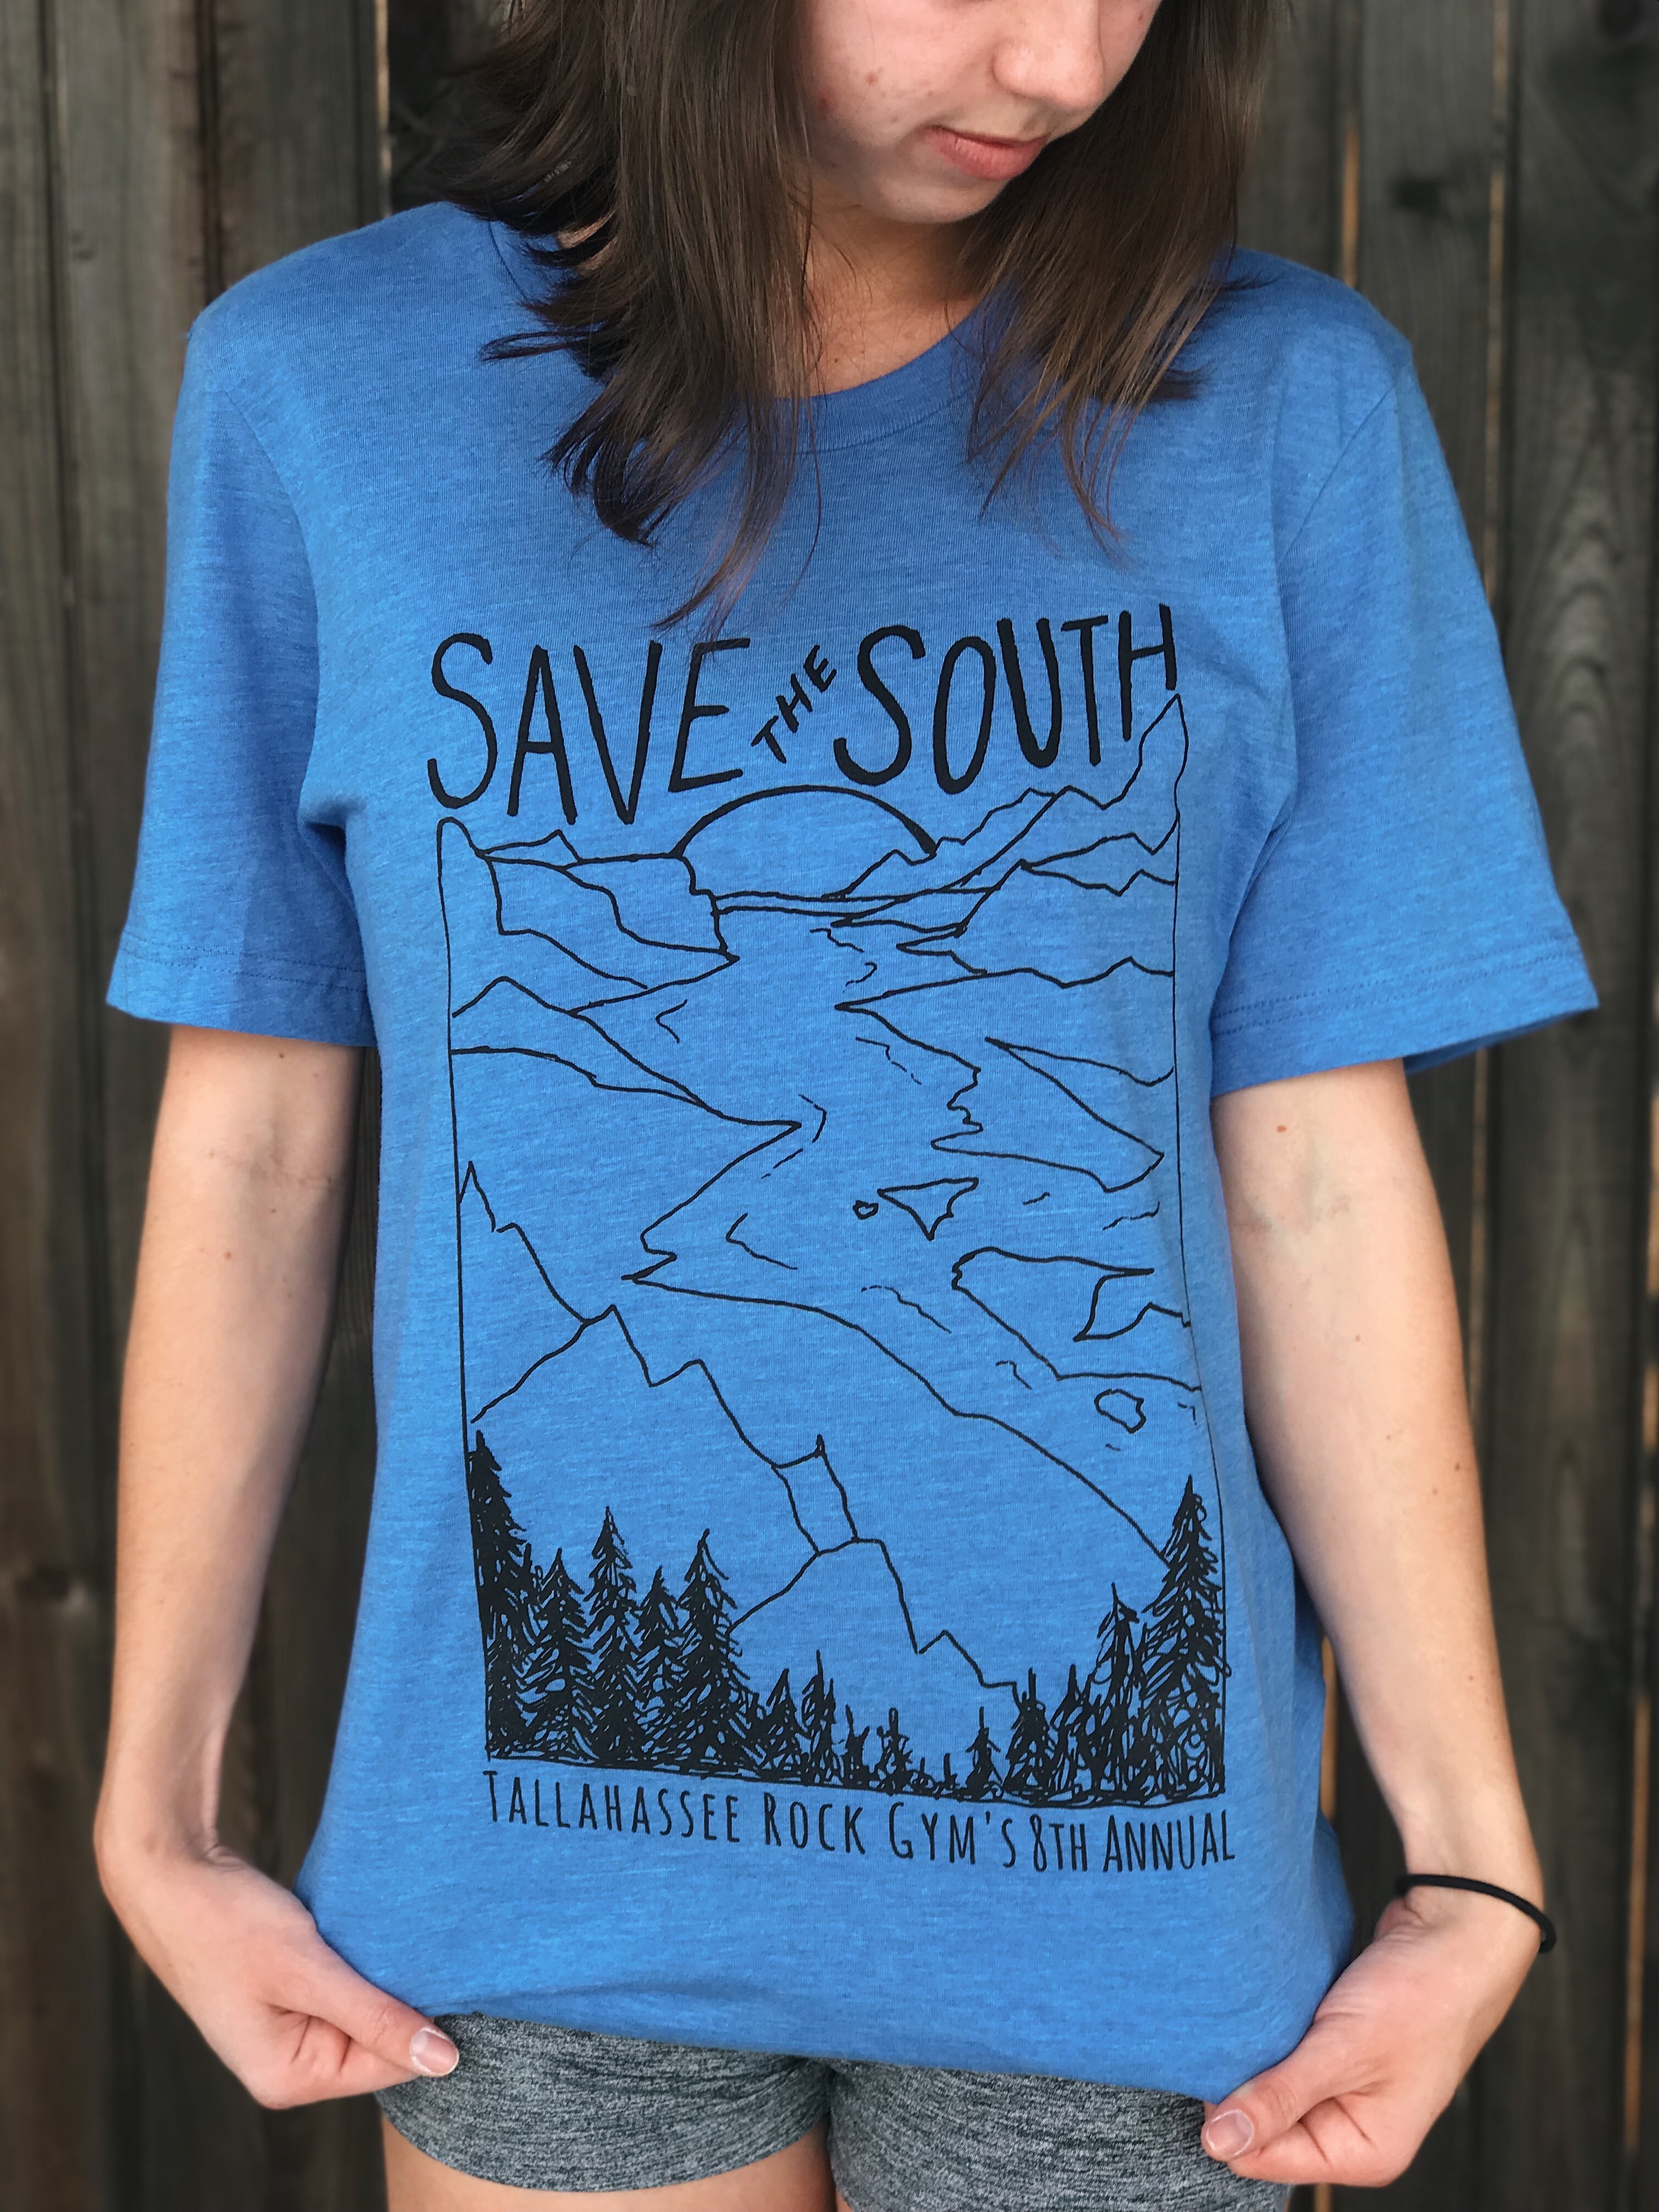 Save the South 2018